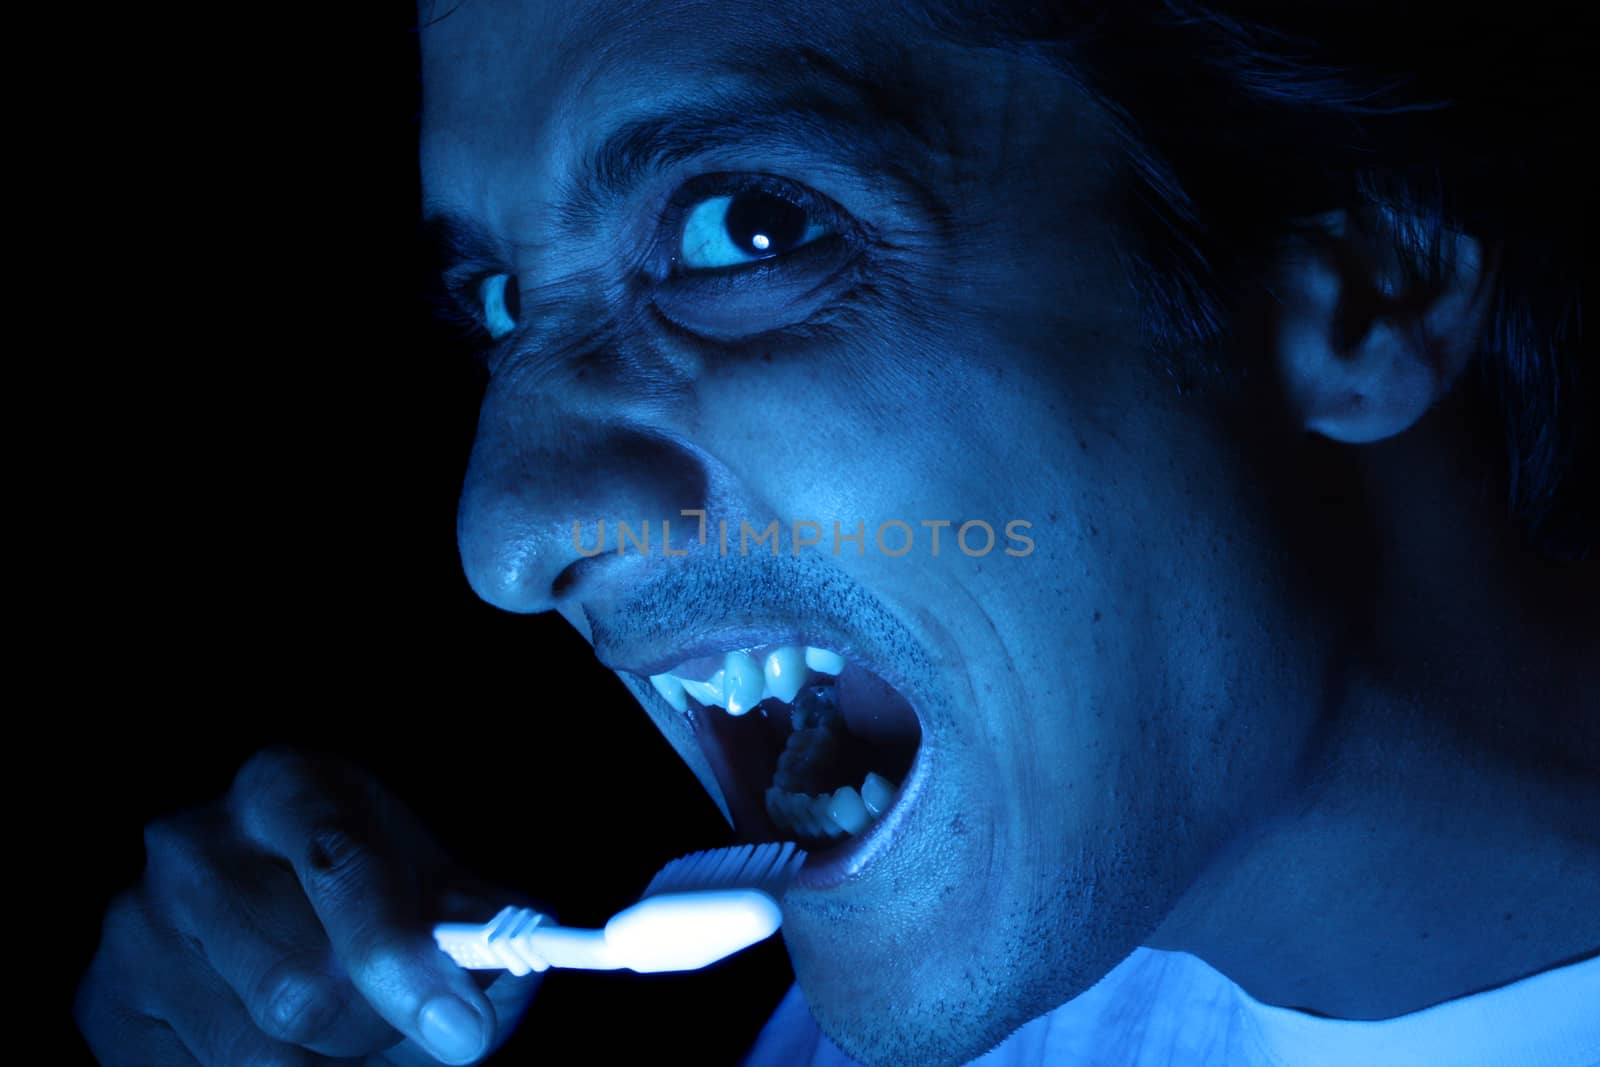 A funny image showing an Indian man brushing his teeth in the night.